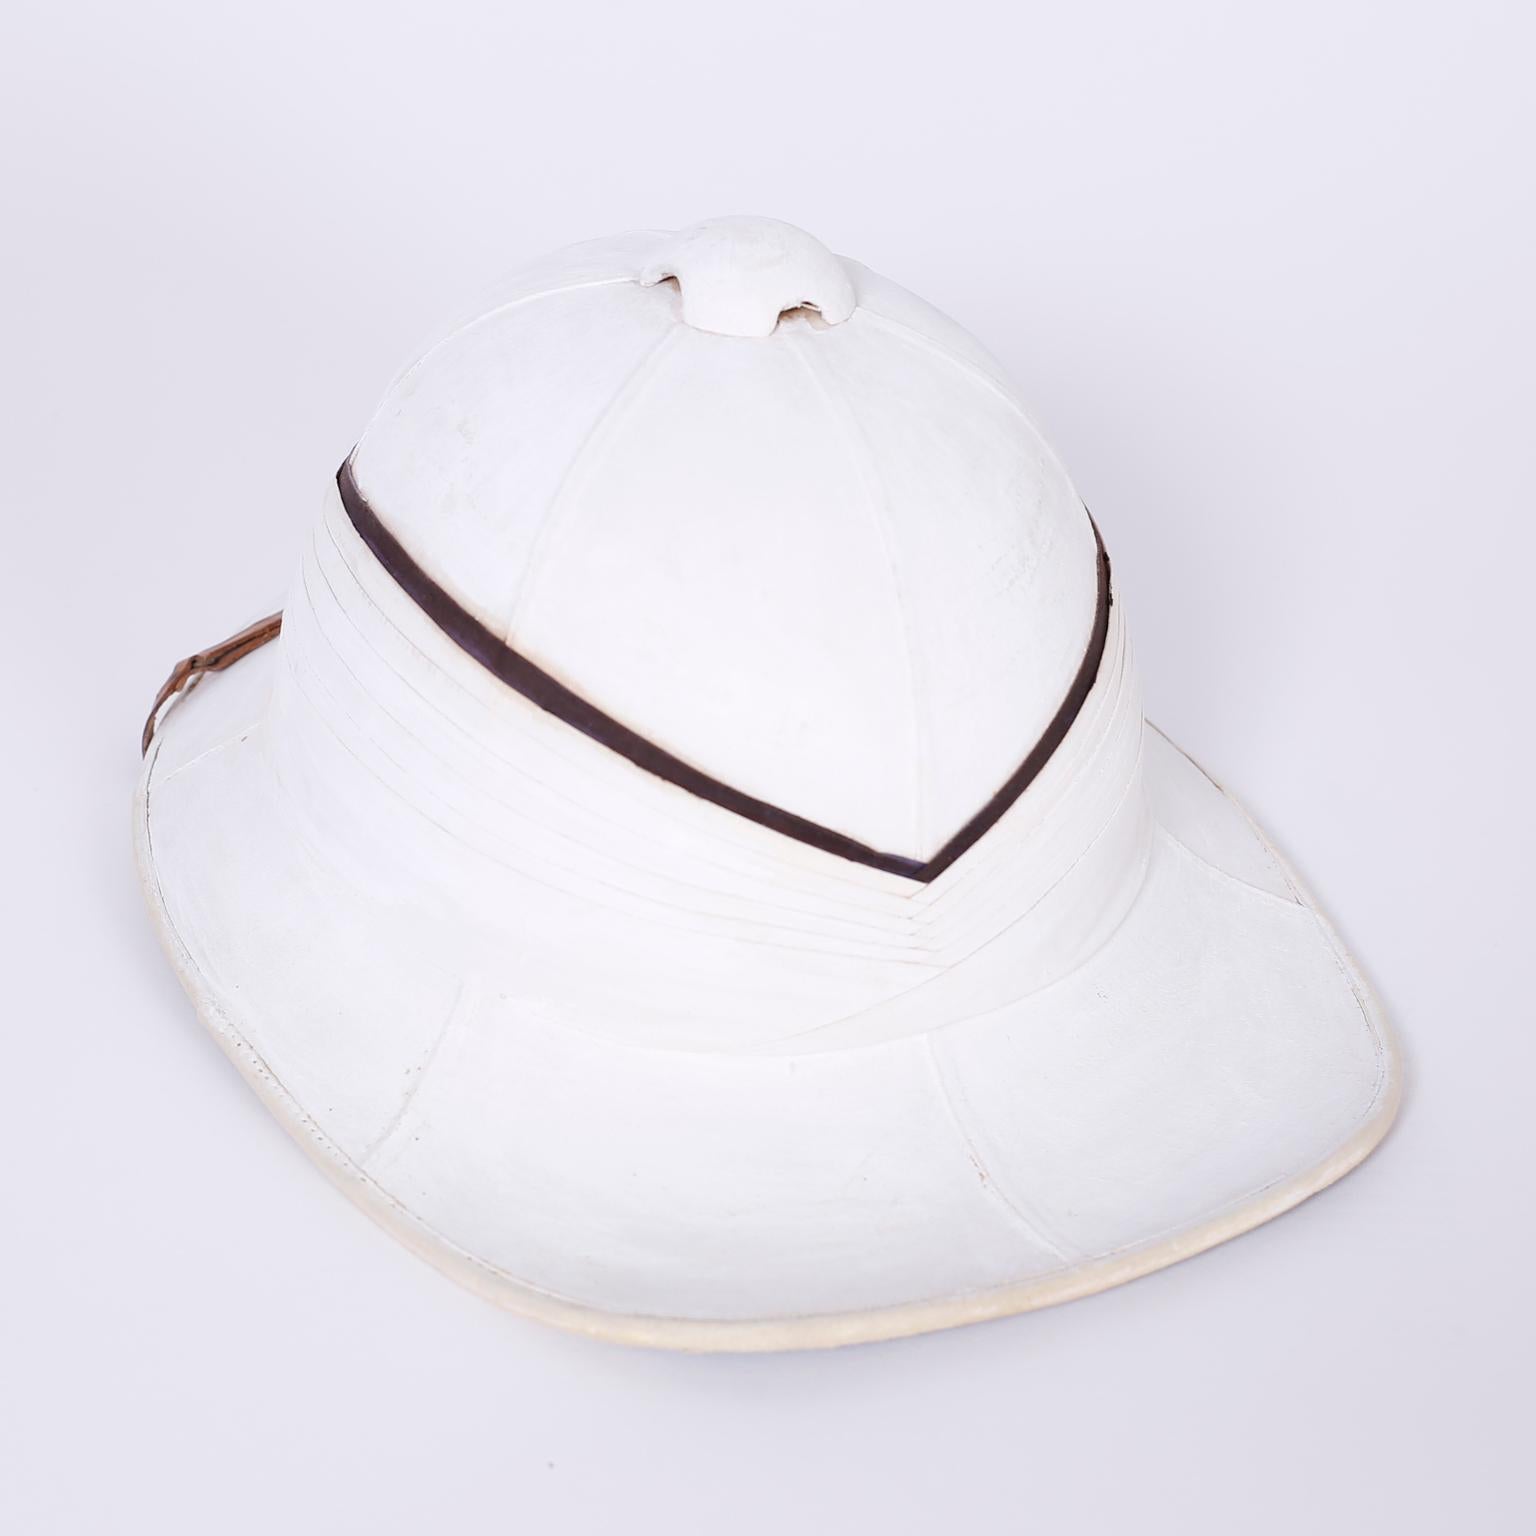 pith helmet images